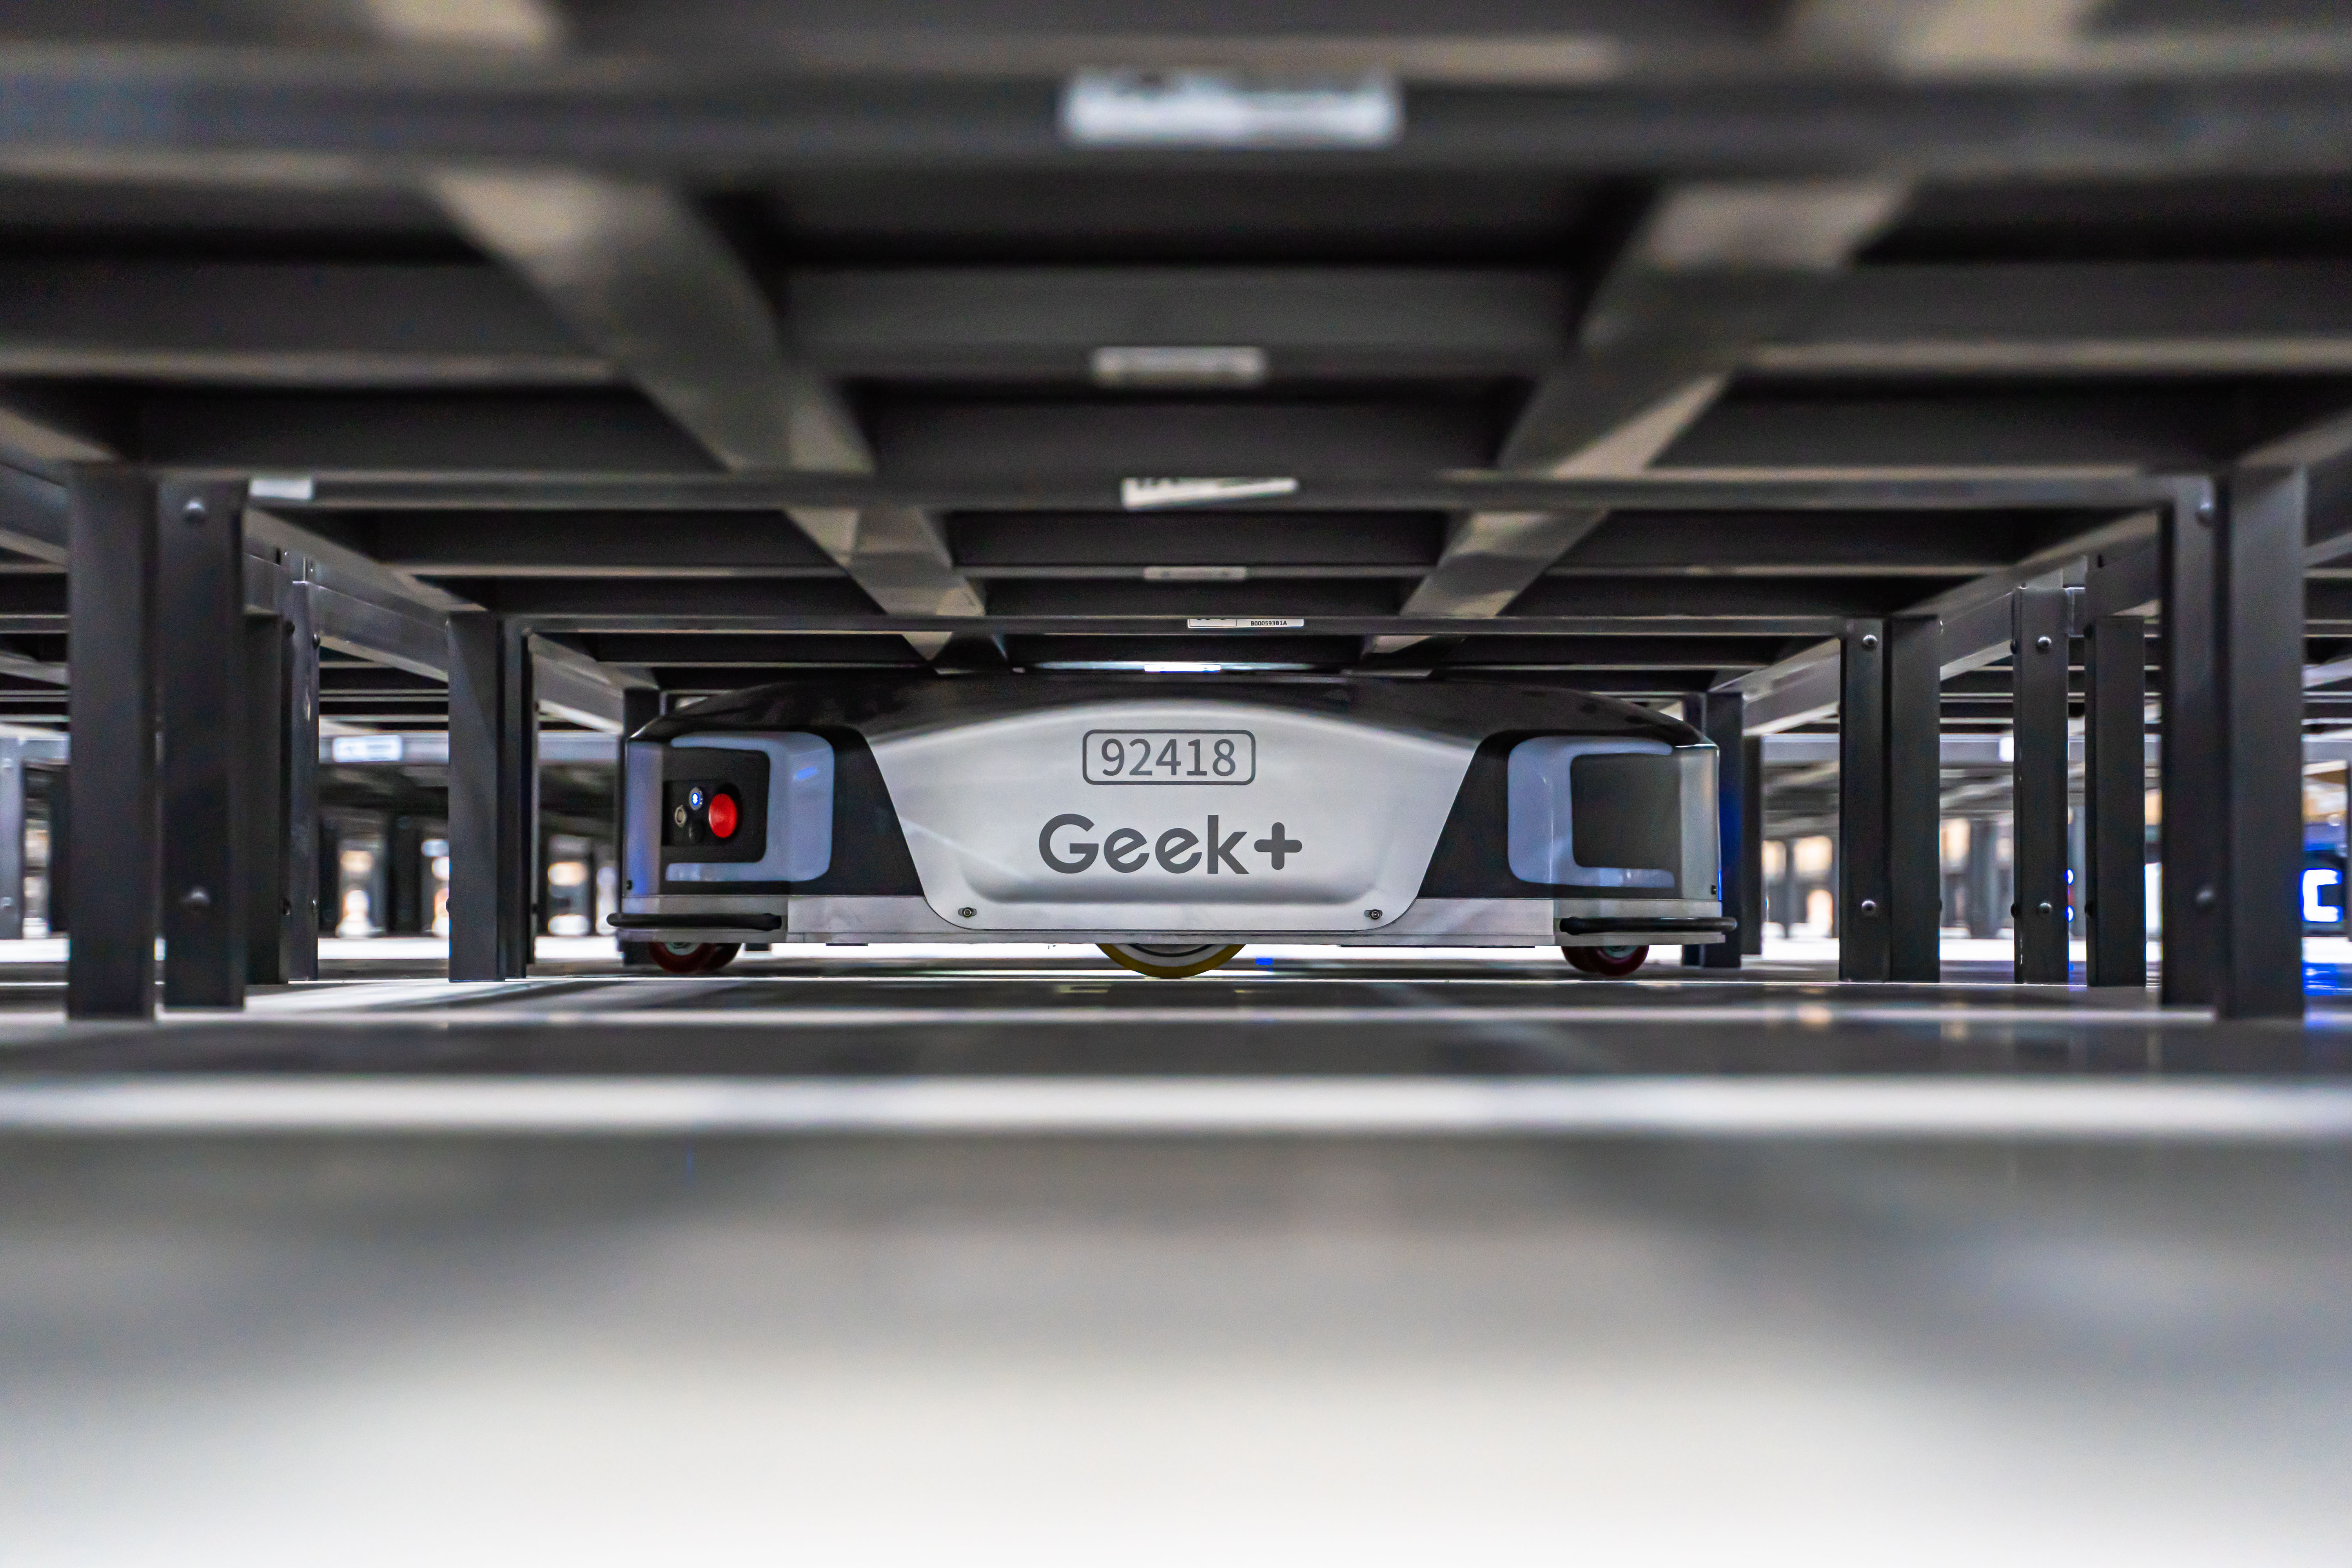 Conveyor Logistics and Geek+ join forces to bring advanced warehouse automation technology to Australia